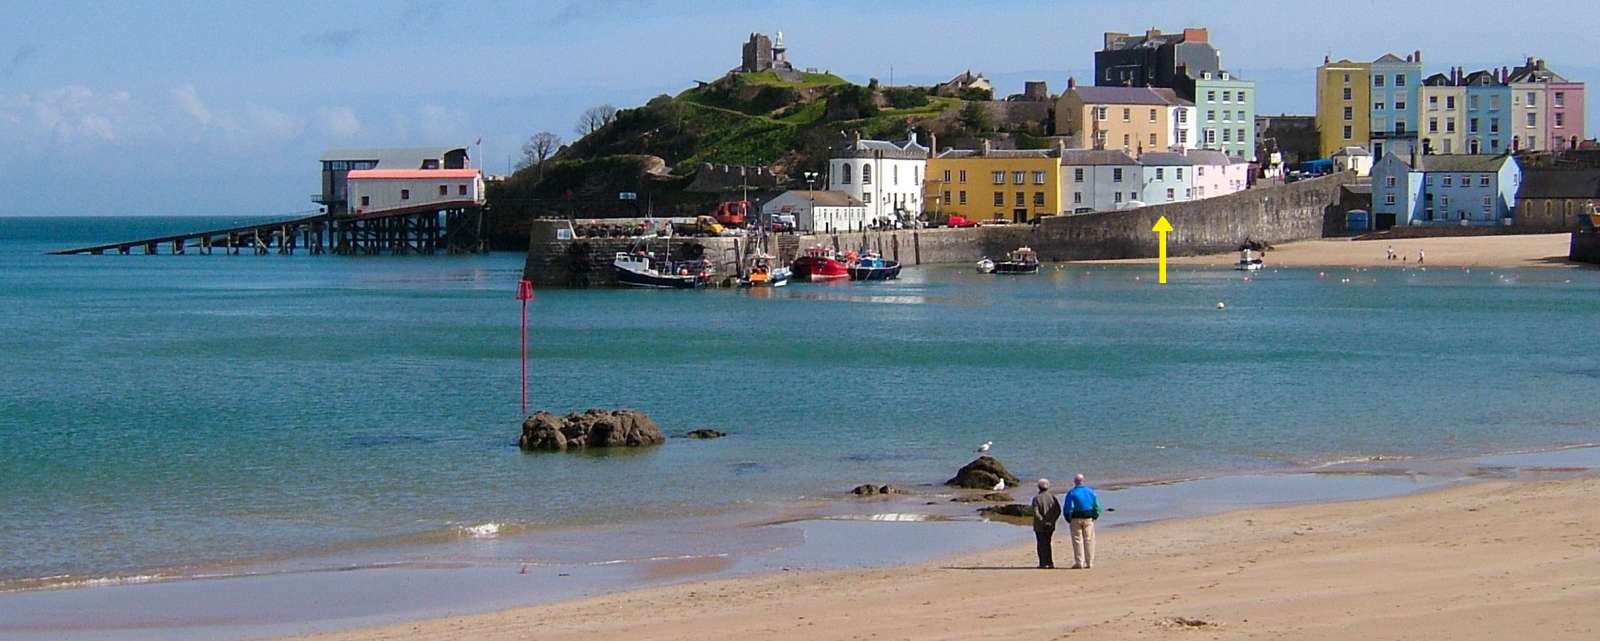 2 Bedroom Sleeps 4 Holiday Cottage Tenby No Booking Fees P86724